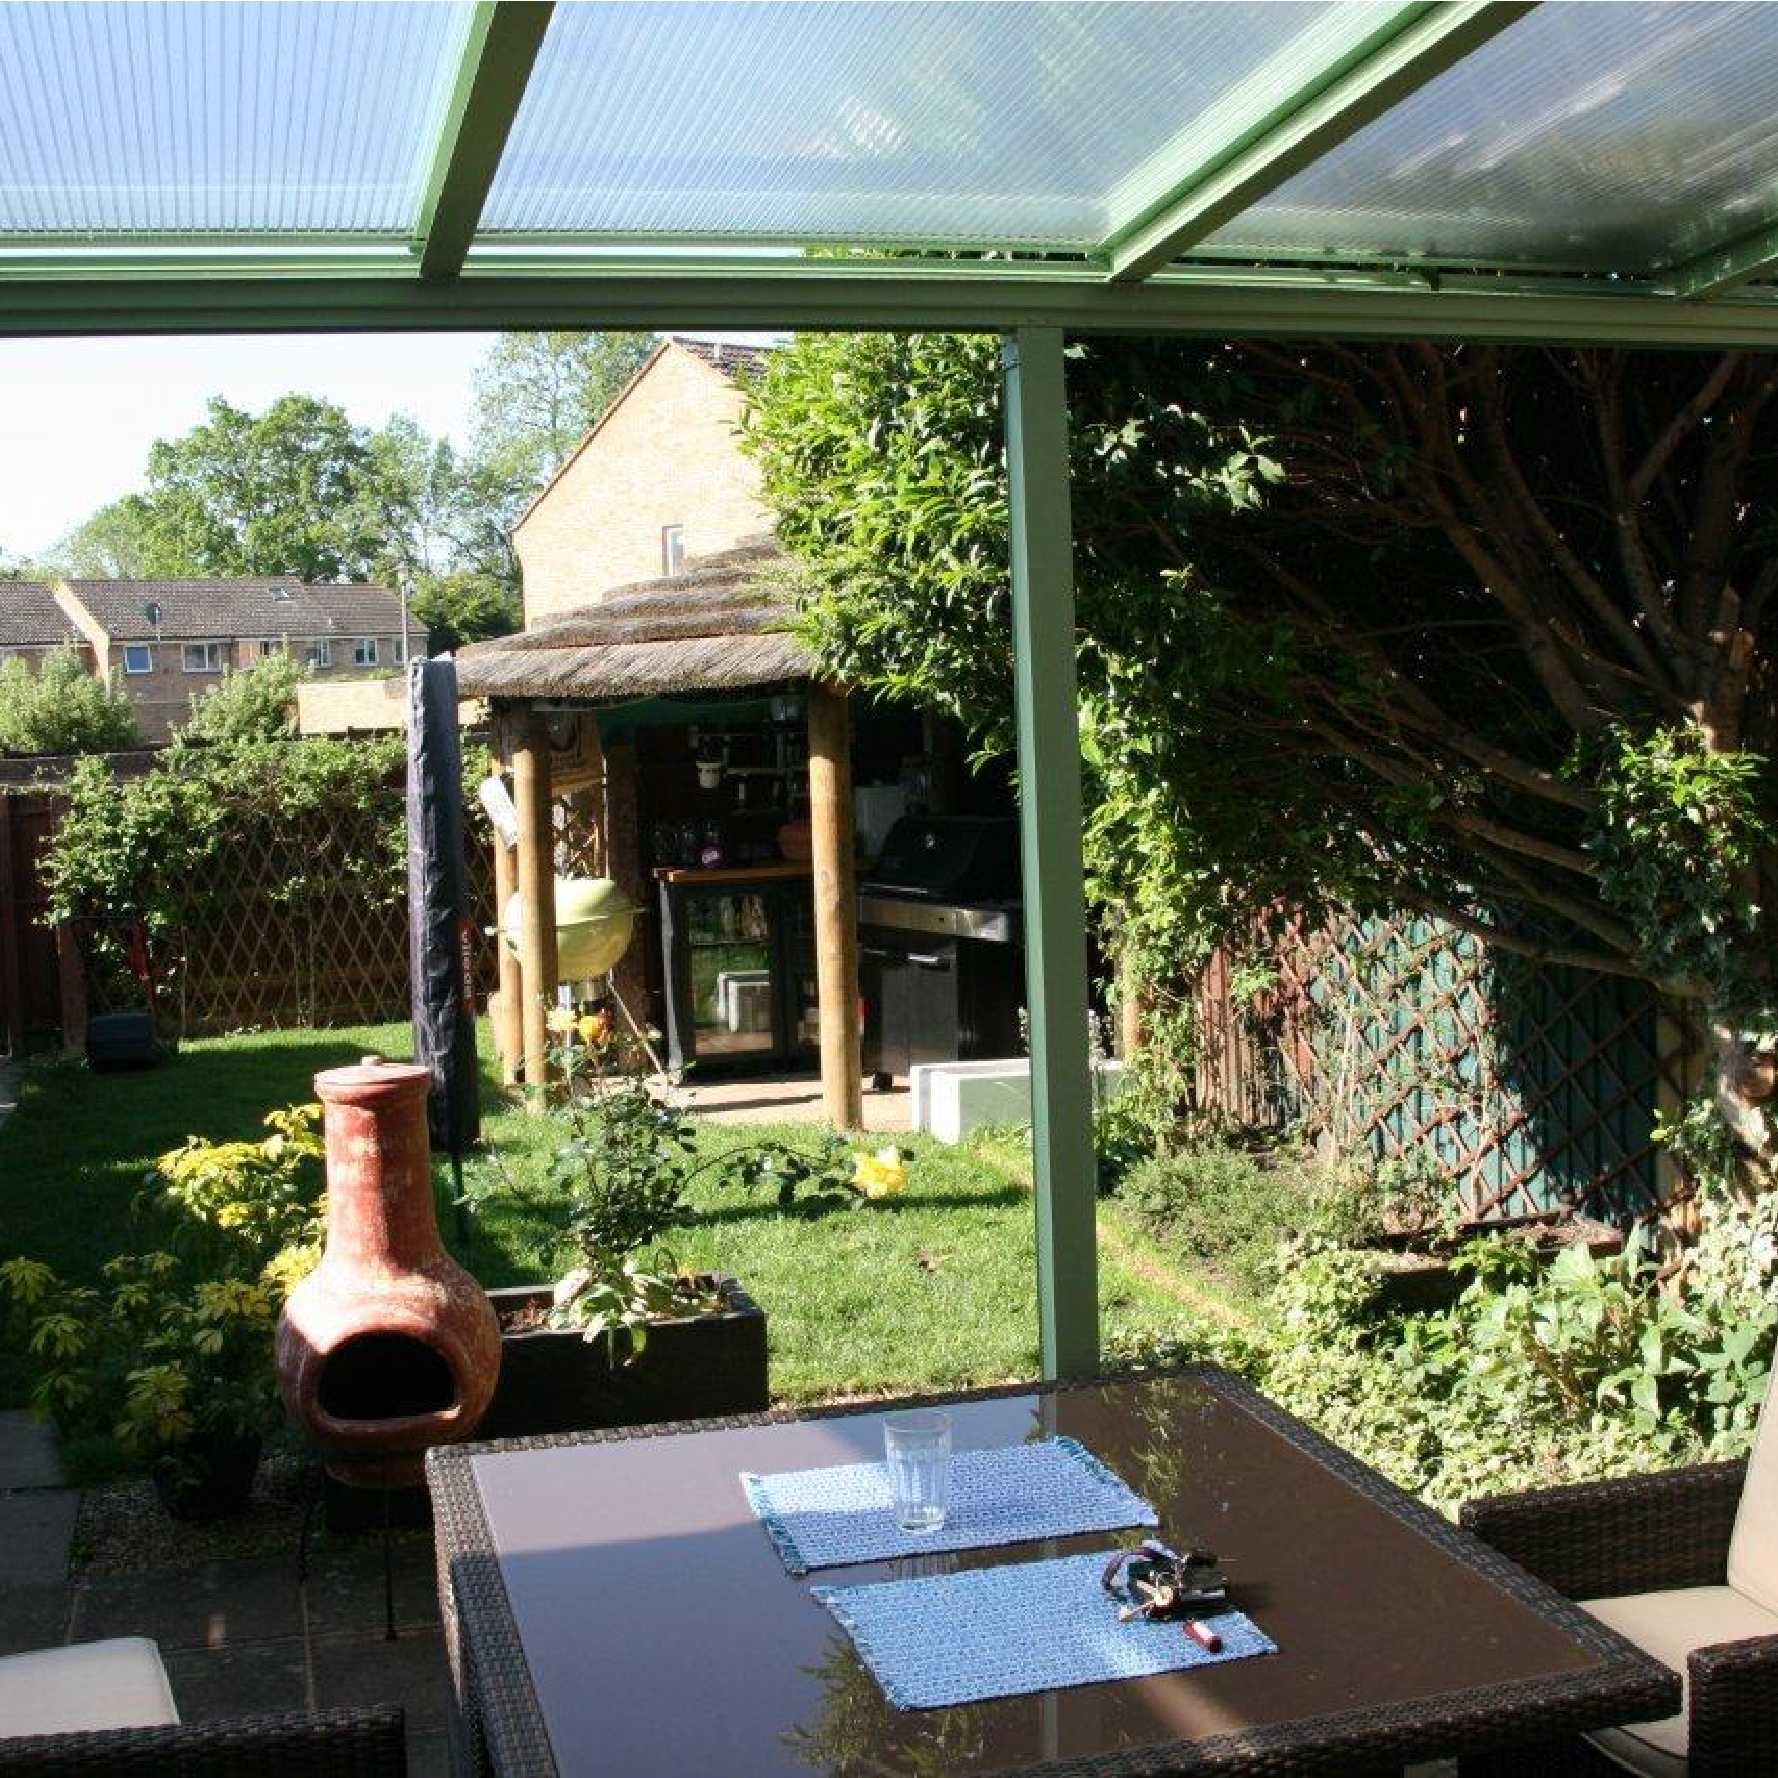 Affordable Omega Smart Lean-To Canopy, White with 16mm Polycarbonate Glazing - 4.2m (W) x 2.5m (P), (3) Supporting Posts